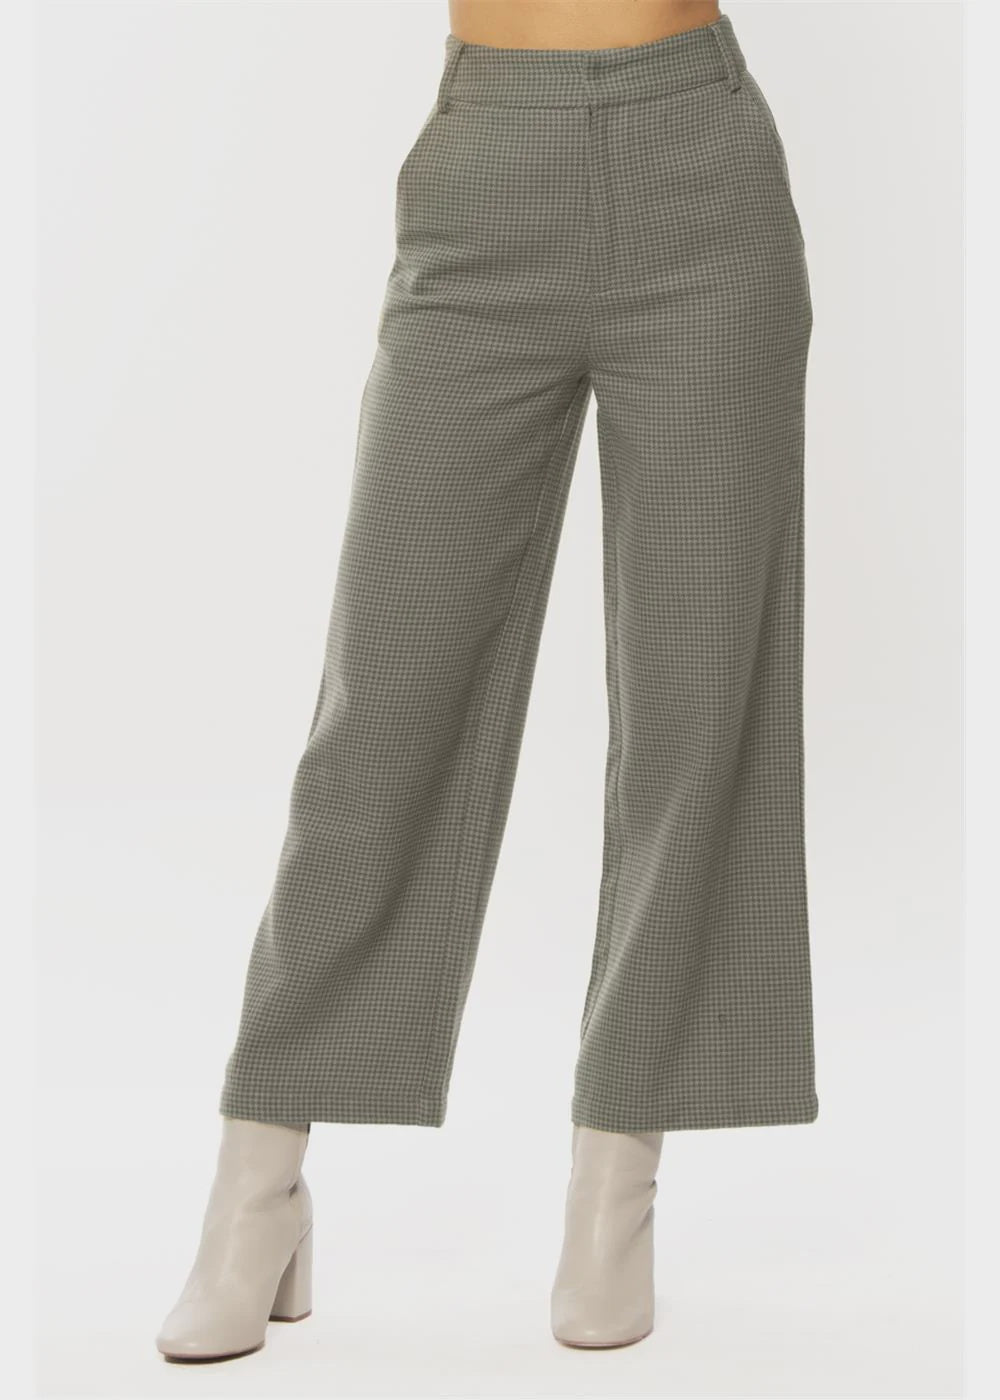 Amuse Society Oh Hey Woven Pant - Willow